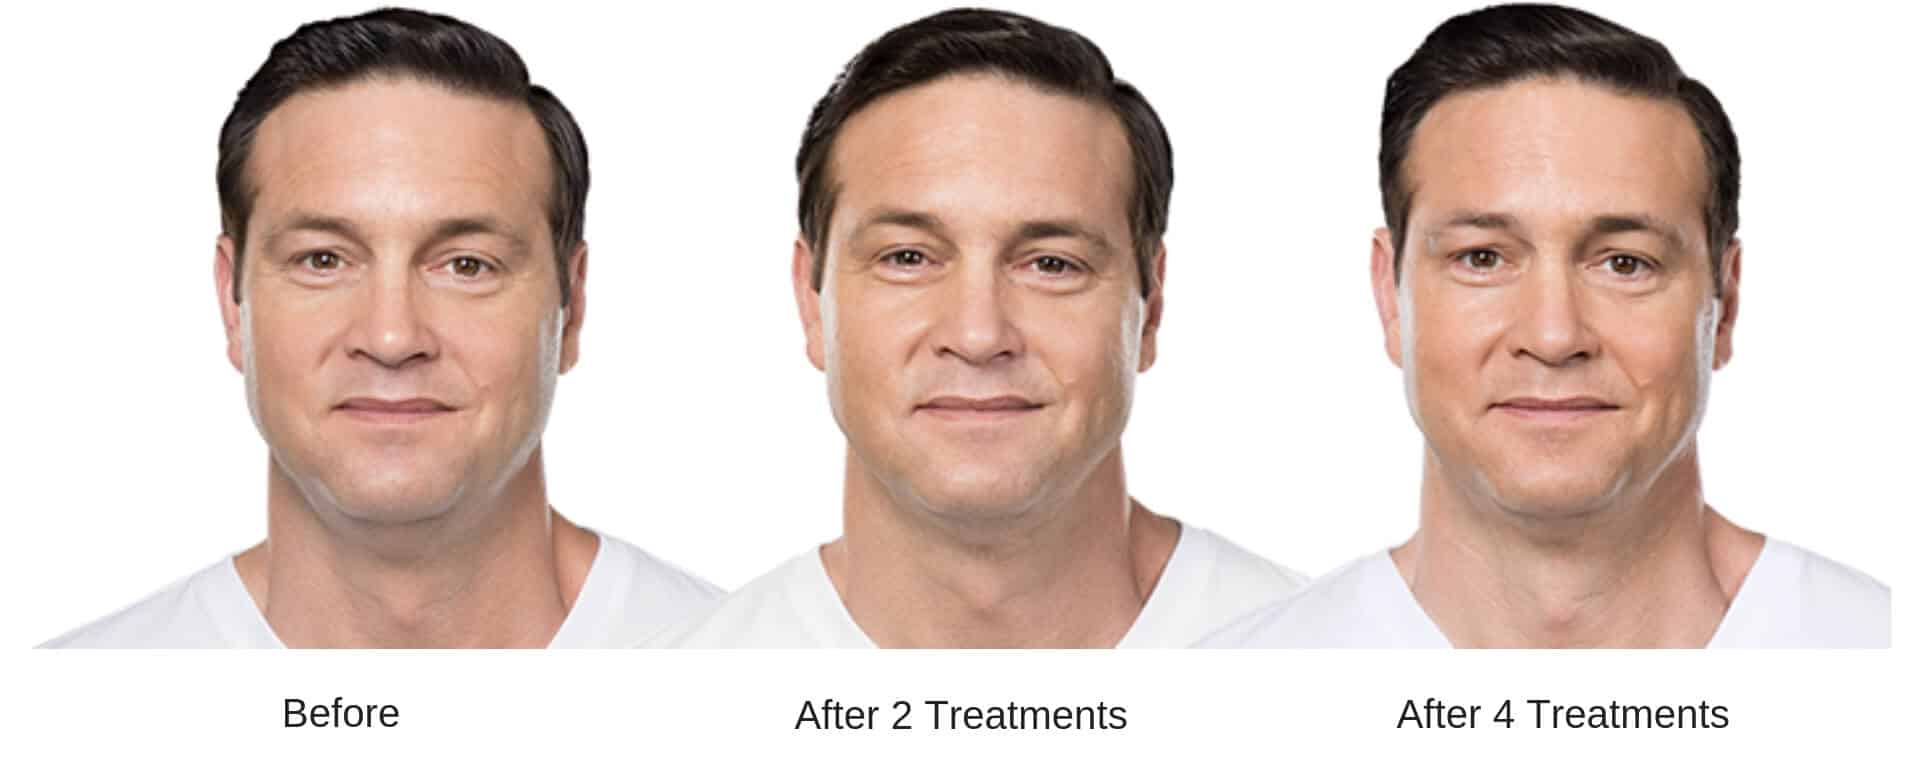 Man's before and after results with Kybella treatment.